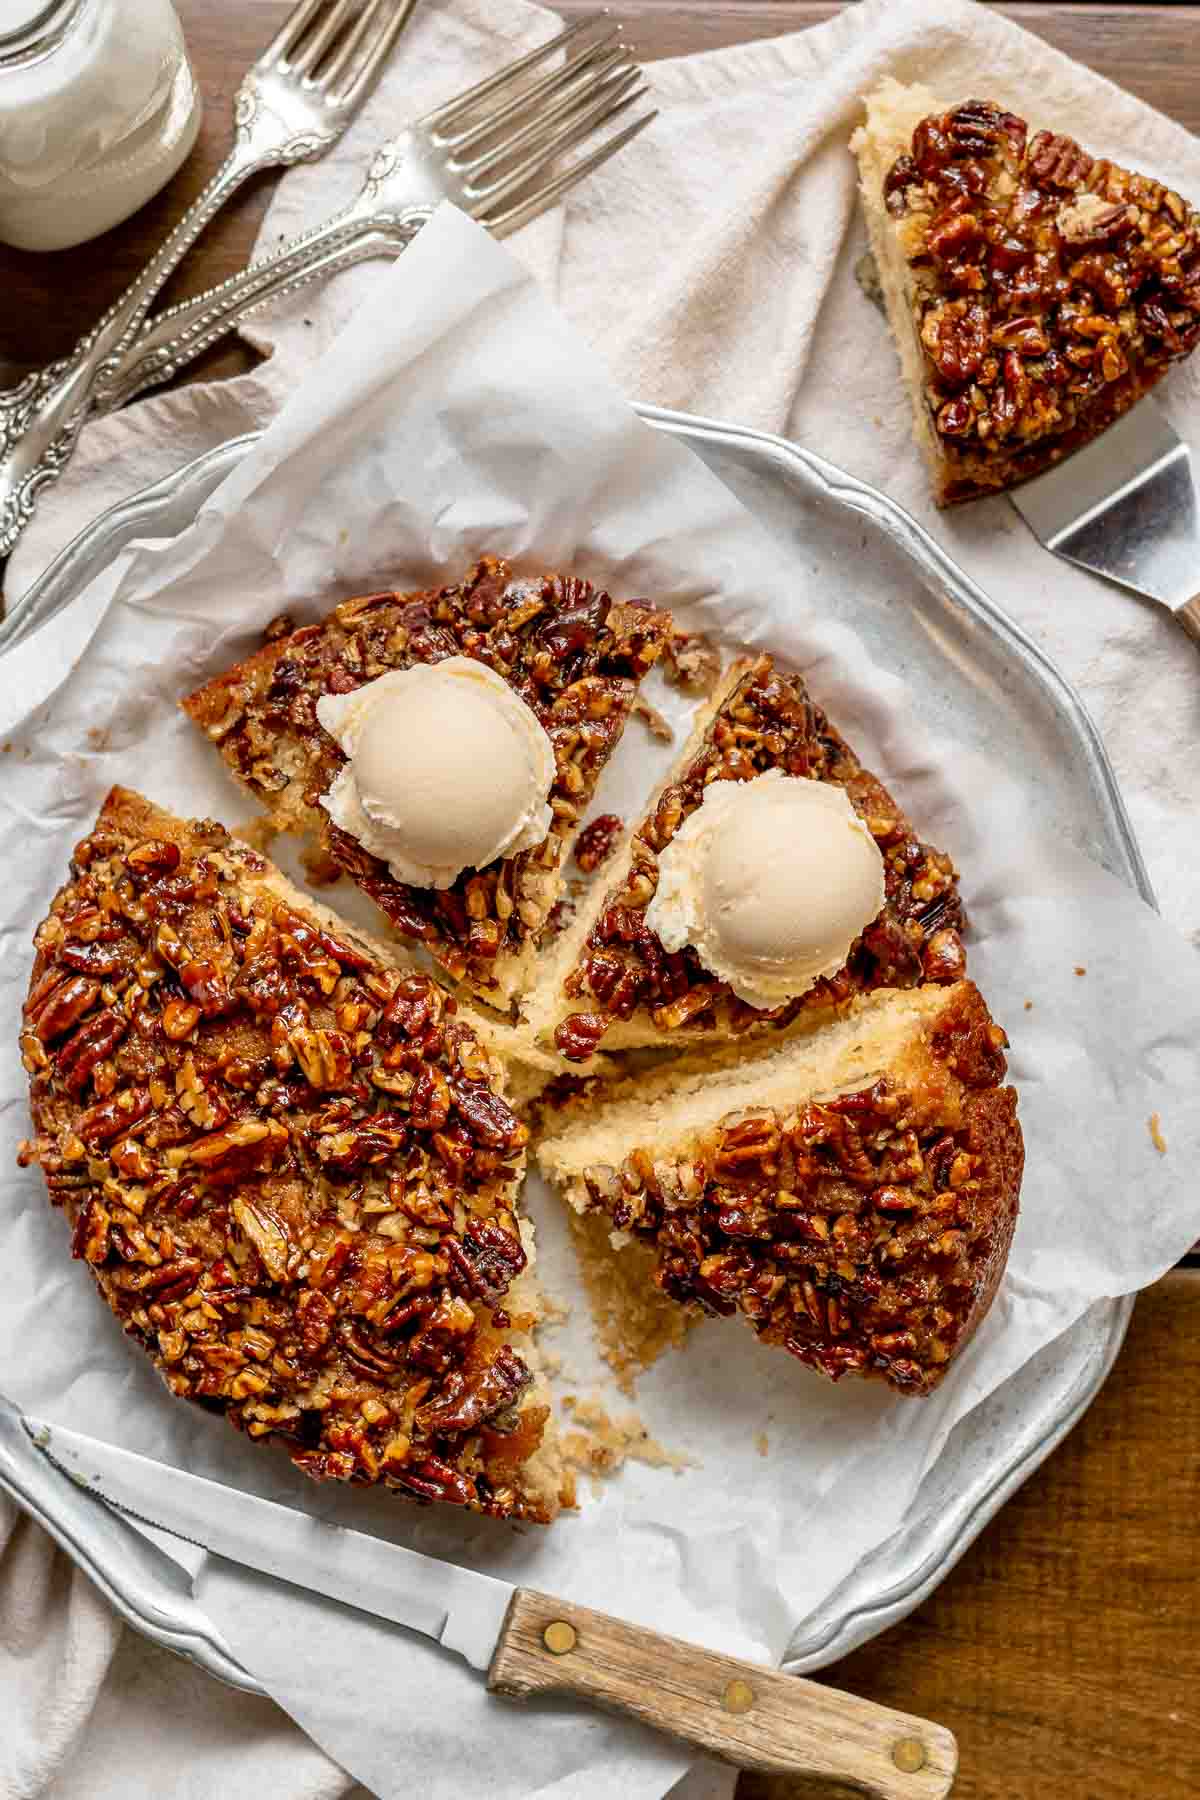 Sliced upside down pecan cake with ice cream scoops on top.